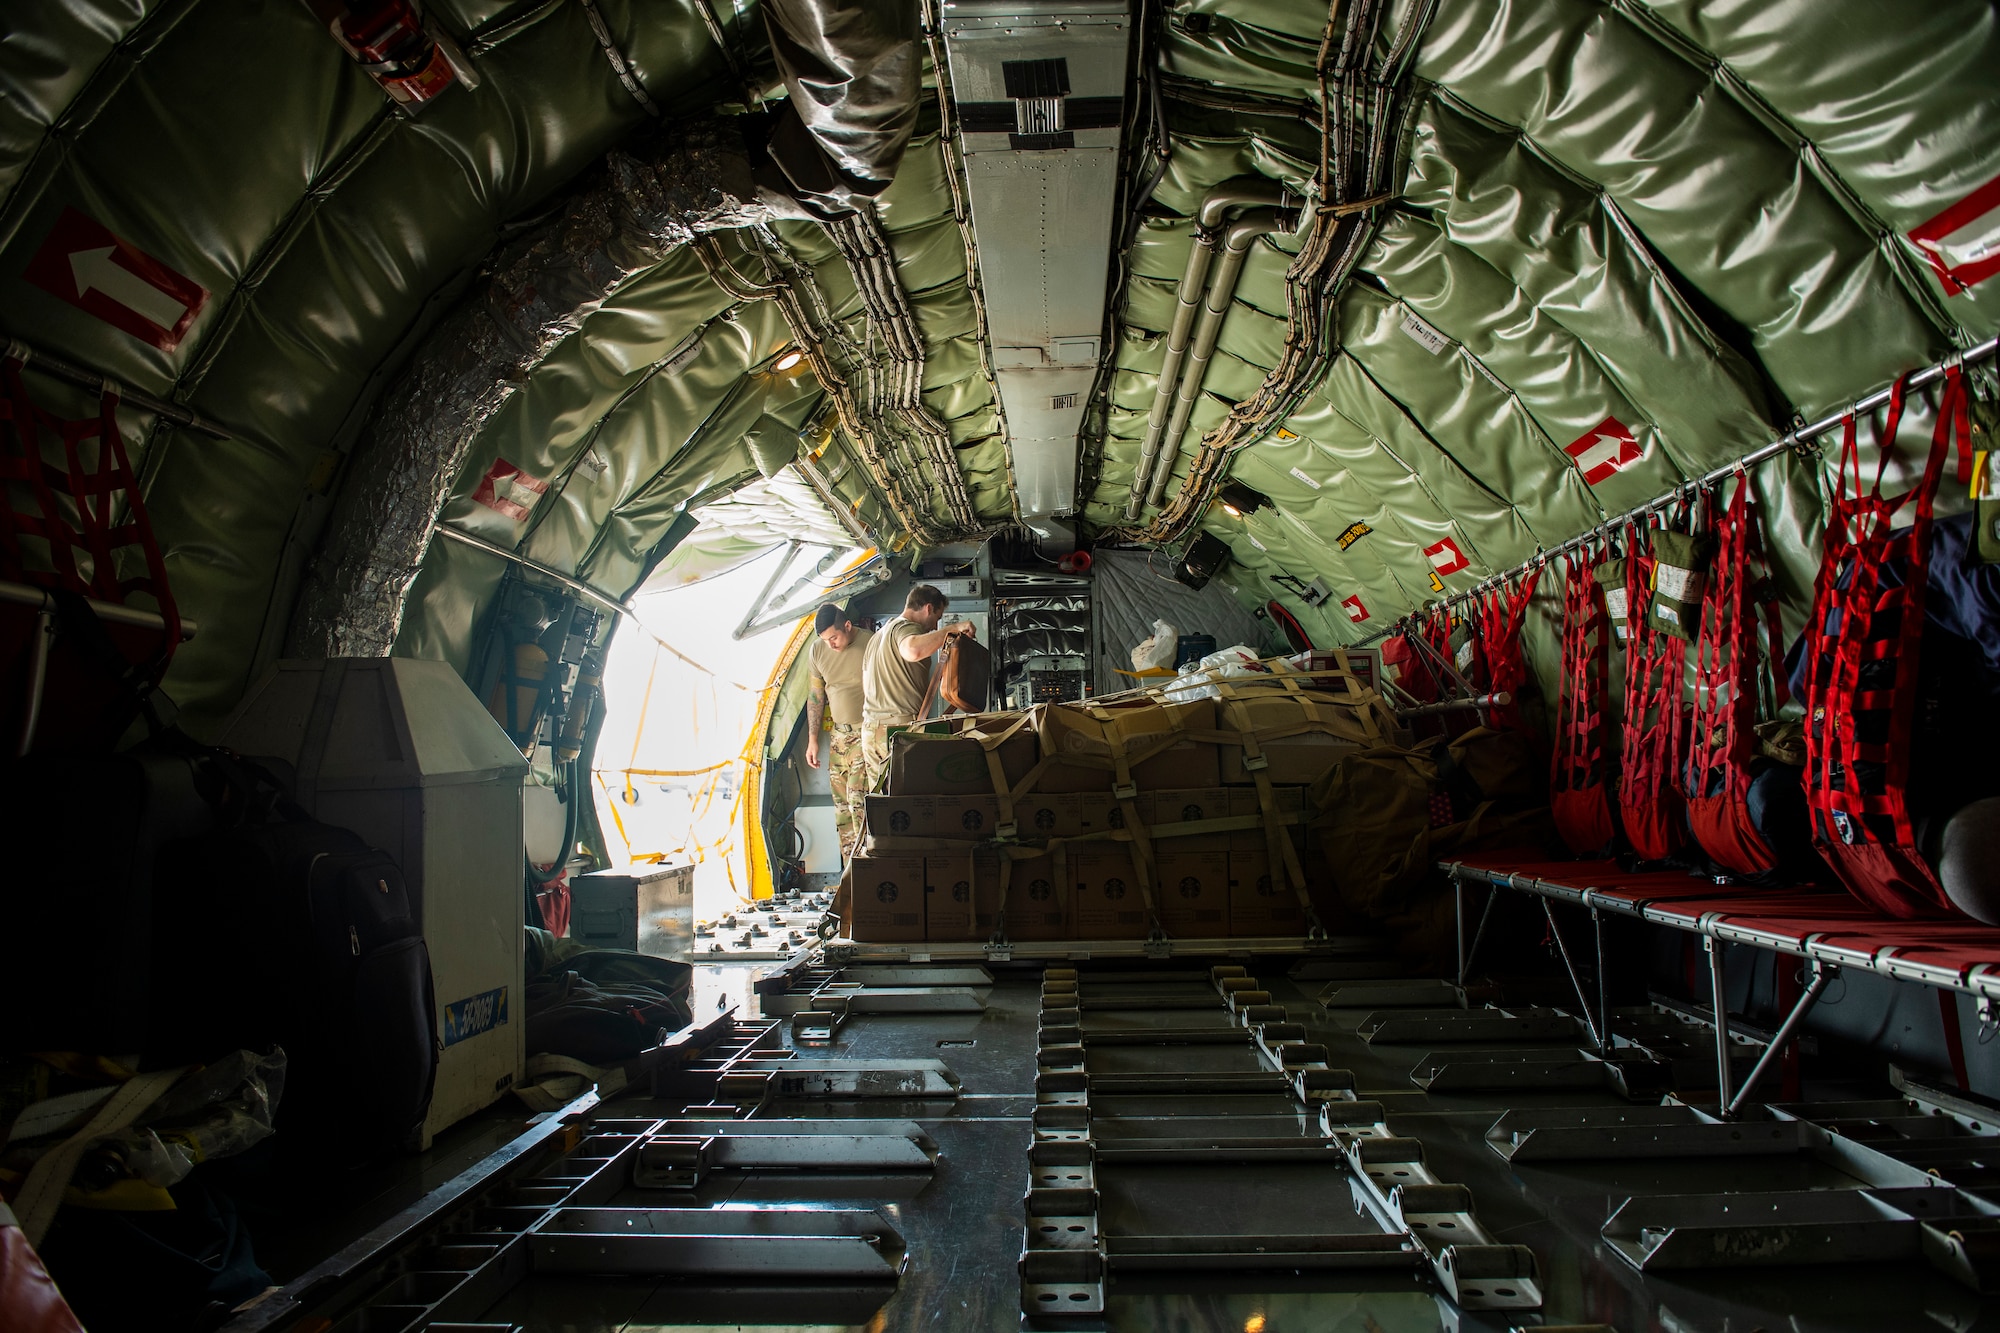 Airmen on-board a KC-135 Stratotanker aircraft from the 50th Air Refueling Squadron secure a cargo load at MacDill Air Force Base, Florida, Dec. 8, 2021.